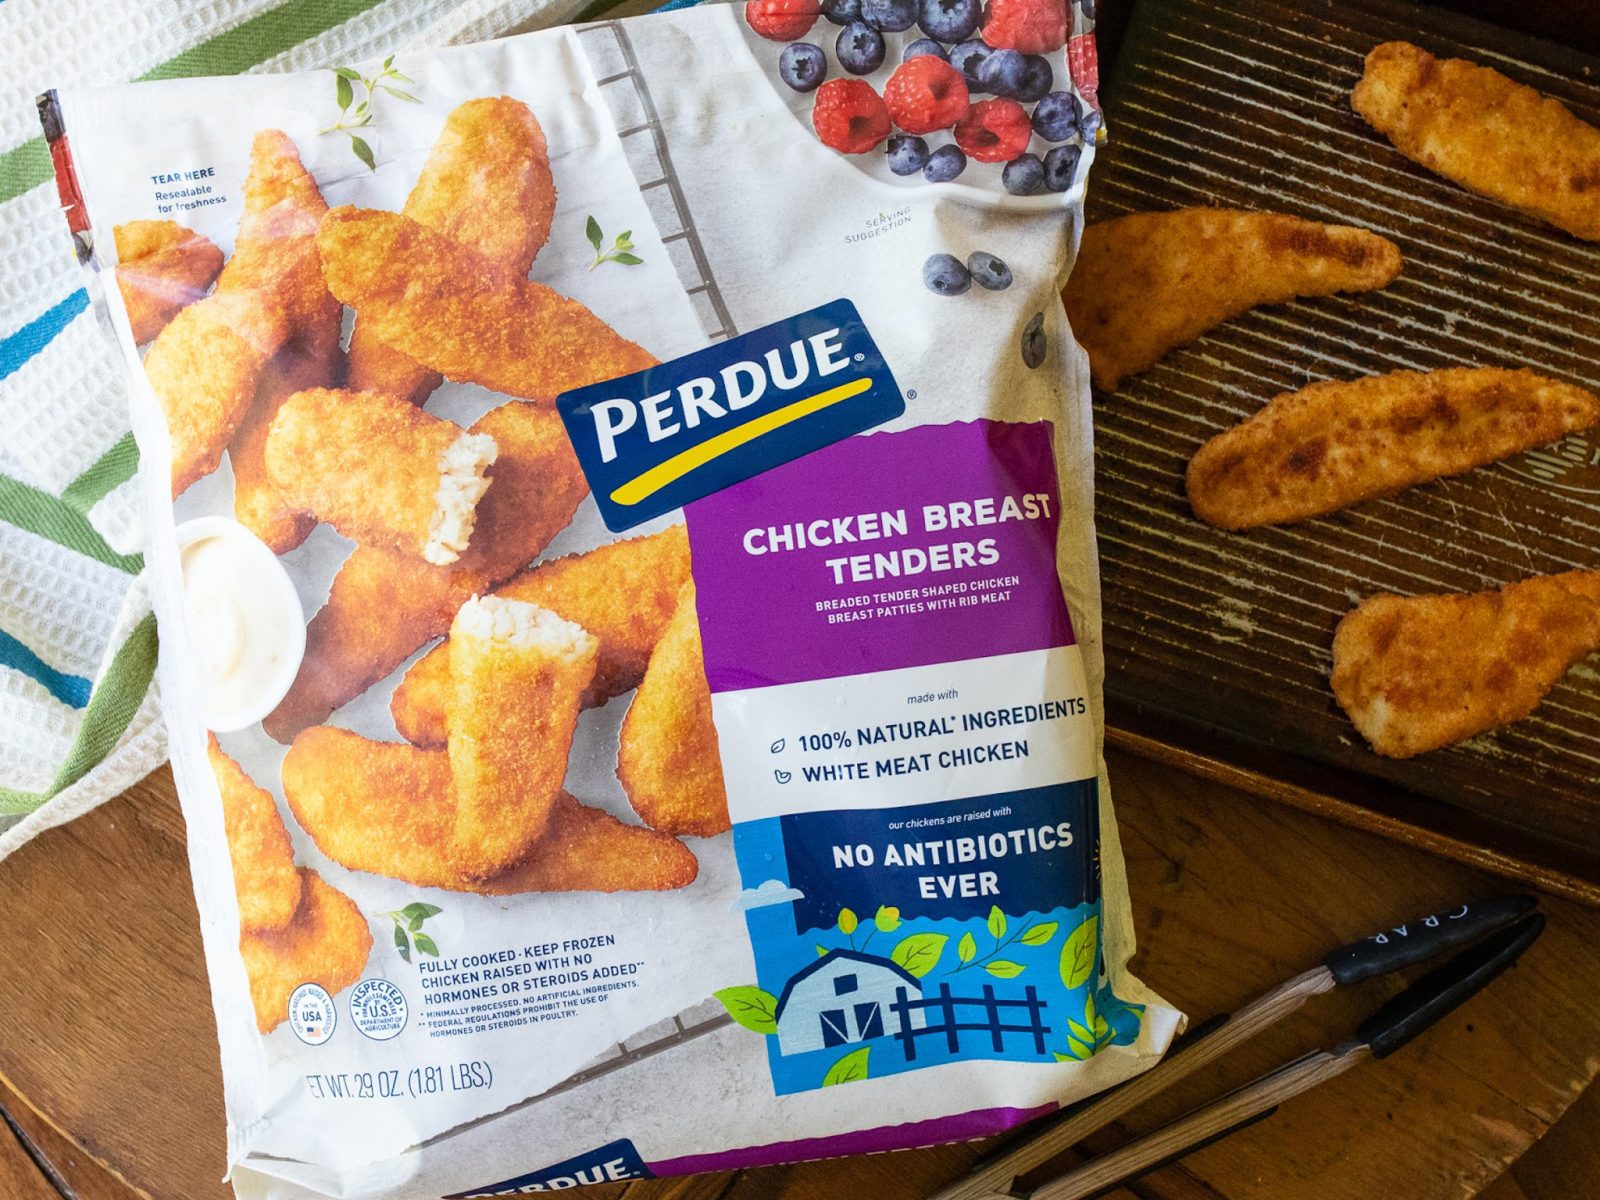 Nice Deal On Perdue Frozen Chicken – Get The Bags For Just $7.99 At Kroger (Regular Price $10.49)